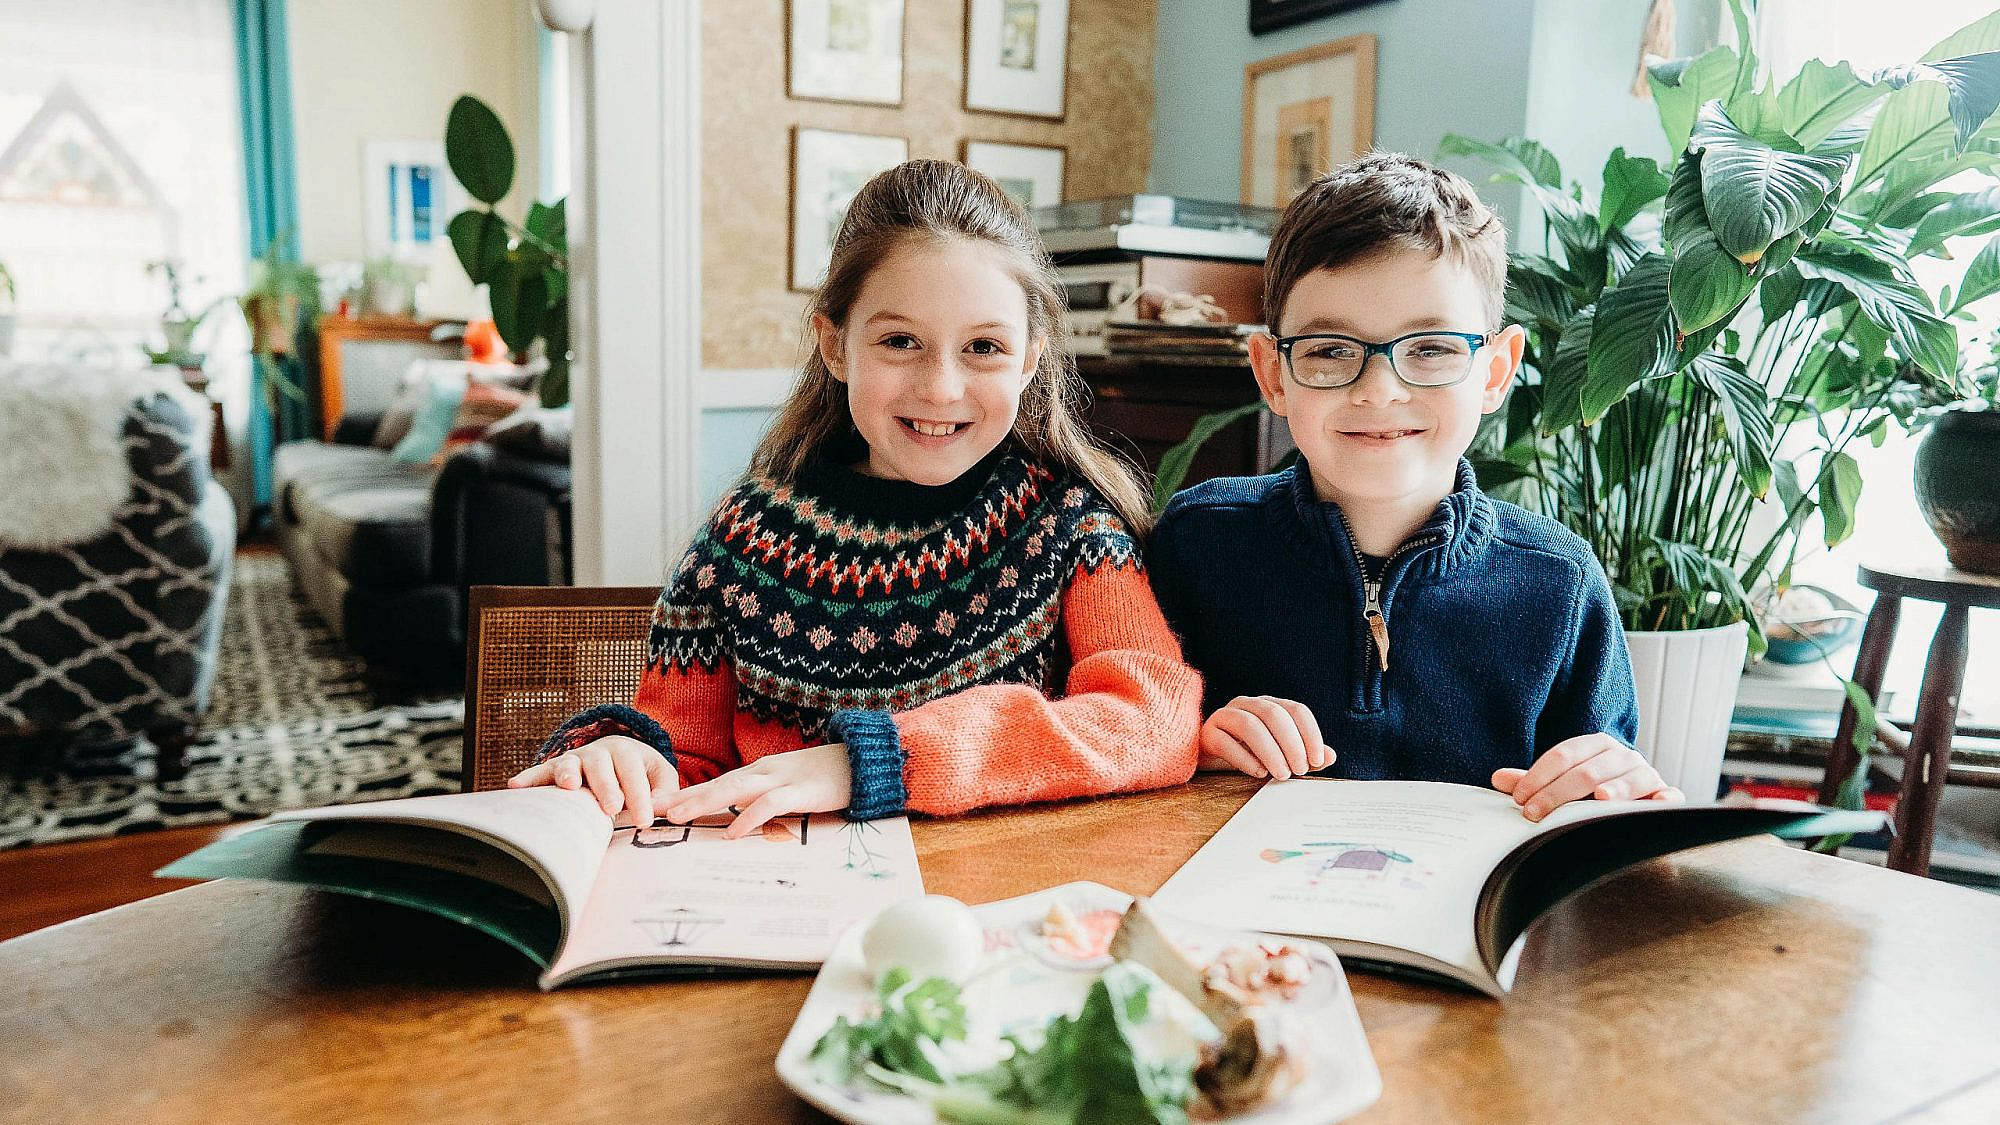 Passover is a time for the kids to get into the kitchen. Credit: PJ Library.